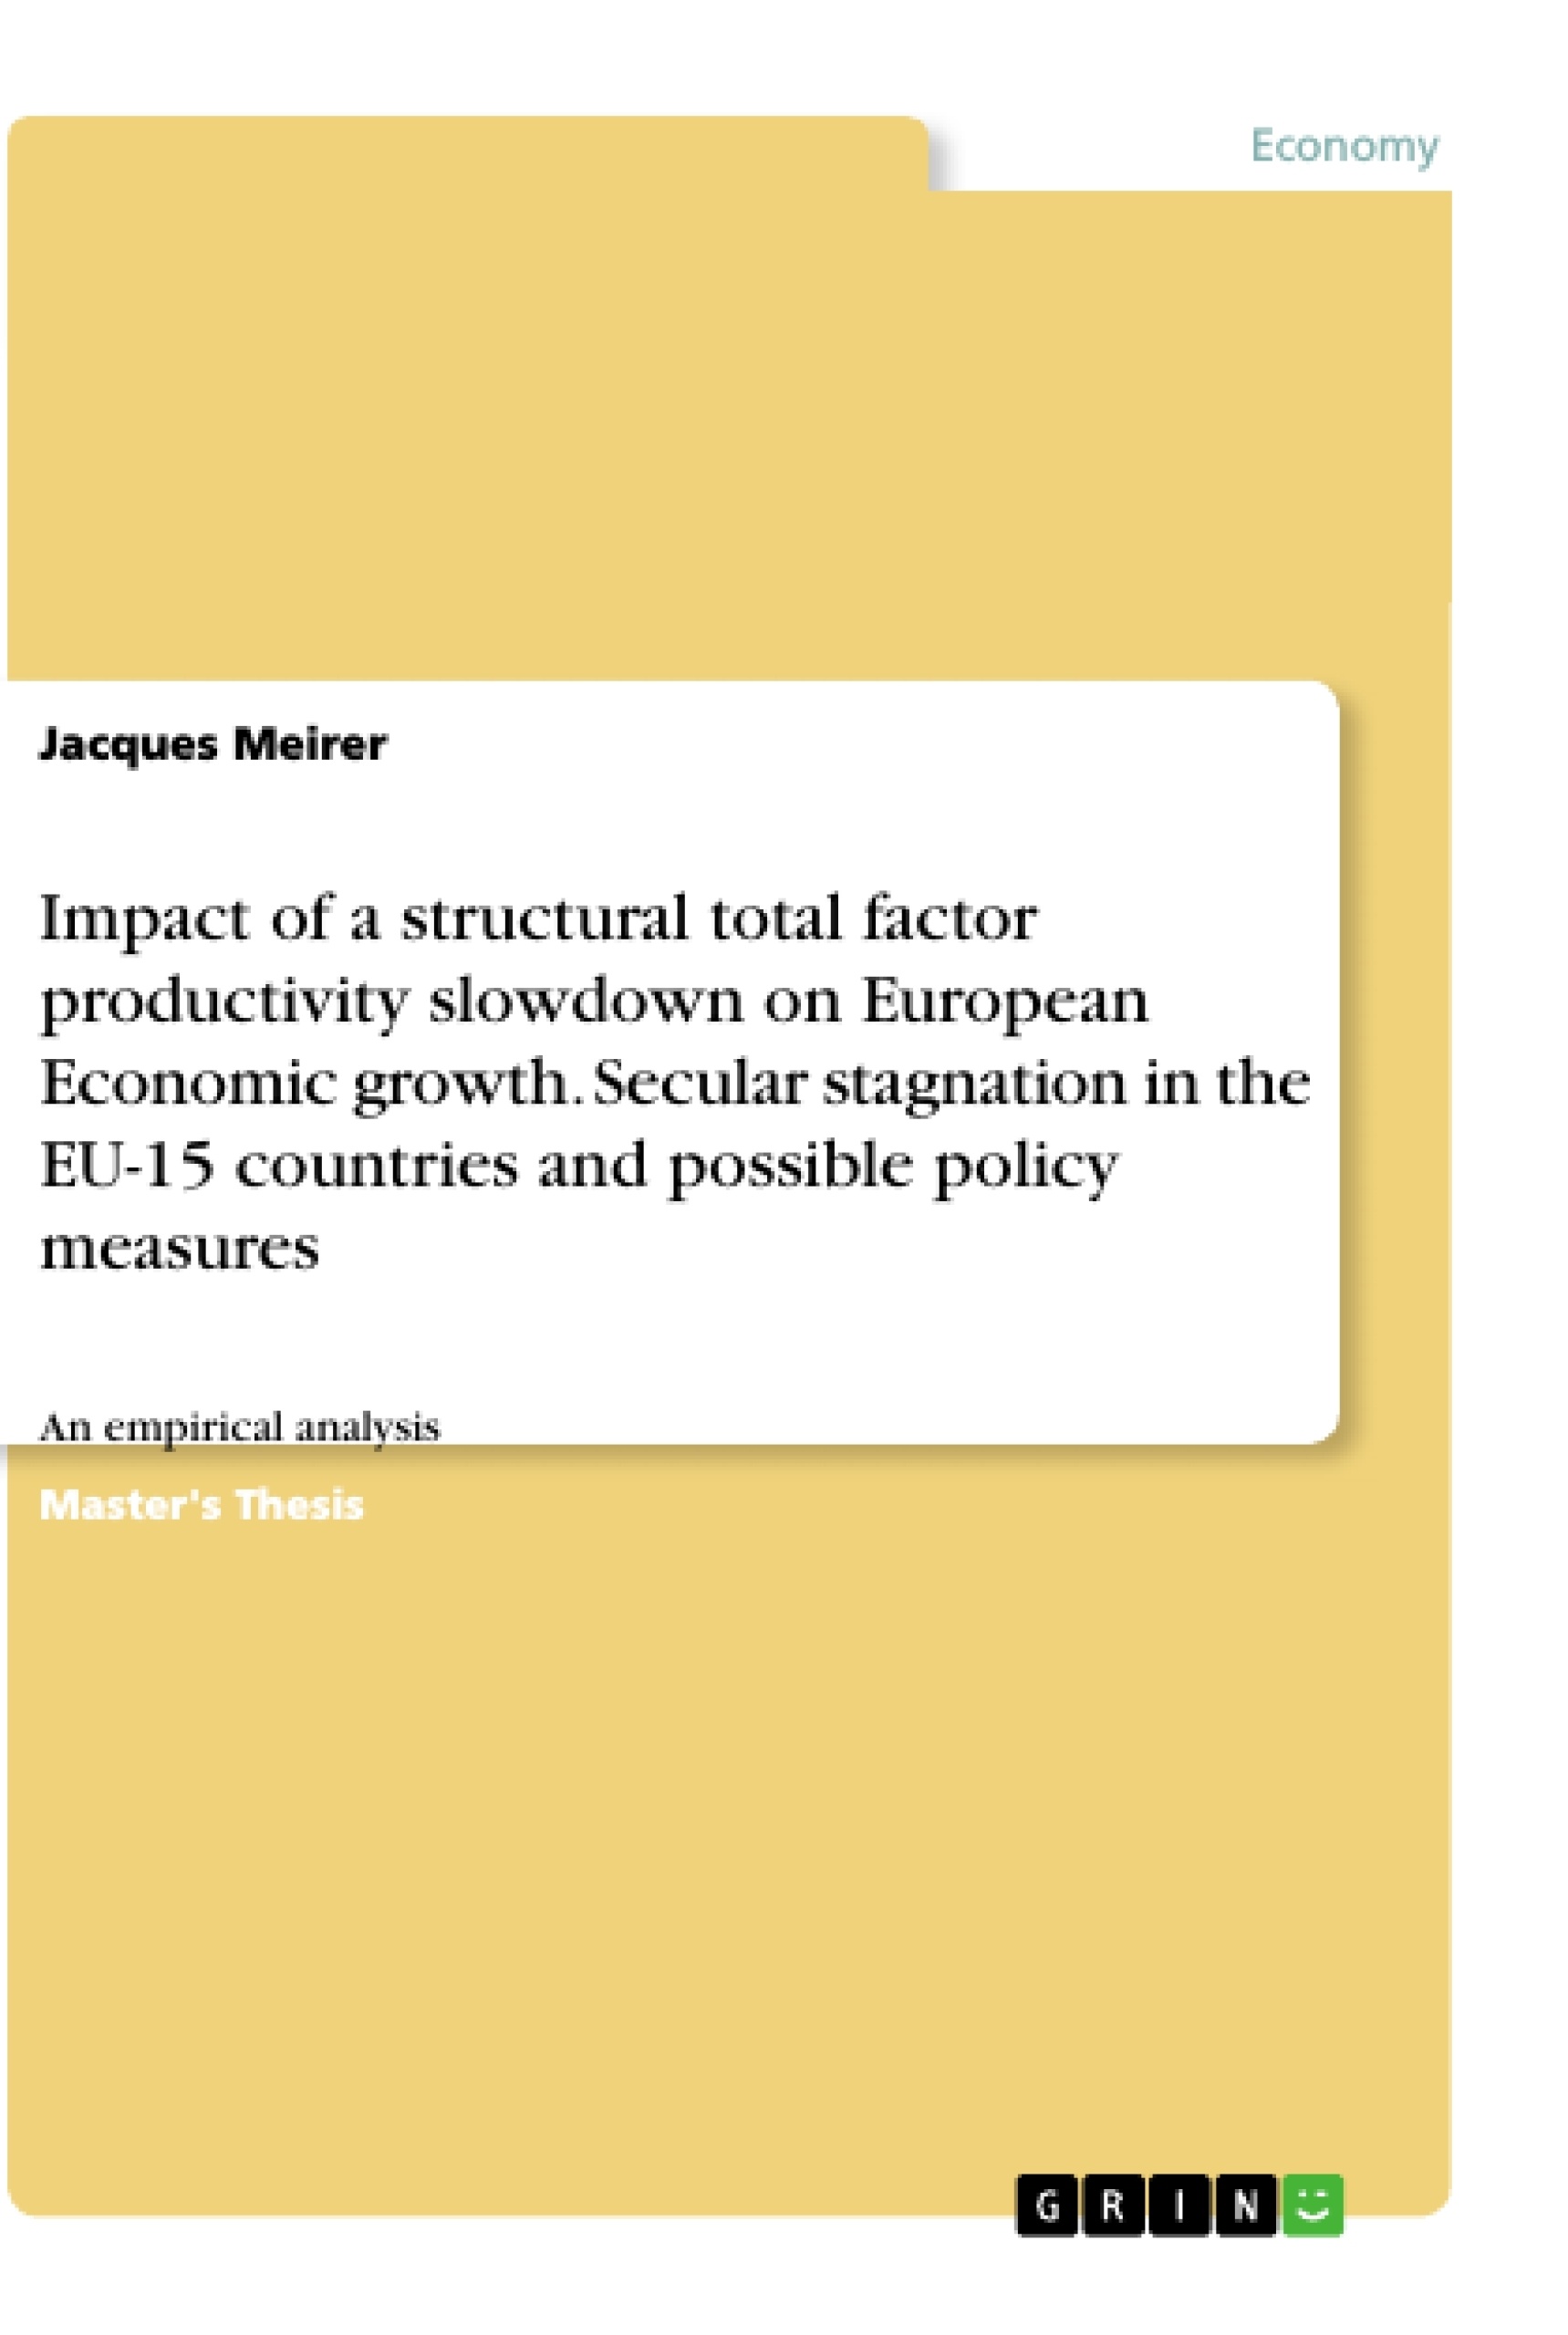 Titre: Impact of a structural total factor productivity slowdown on European Economic growth. Secular stagnation in the EU-15 countries and possible policy measures